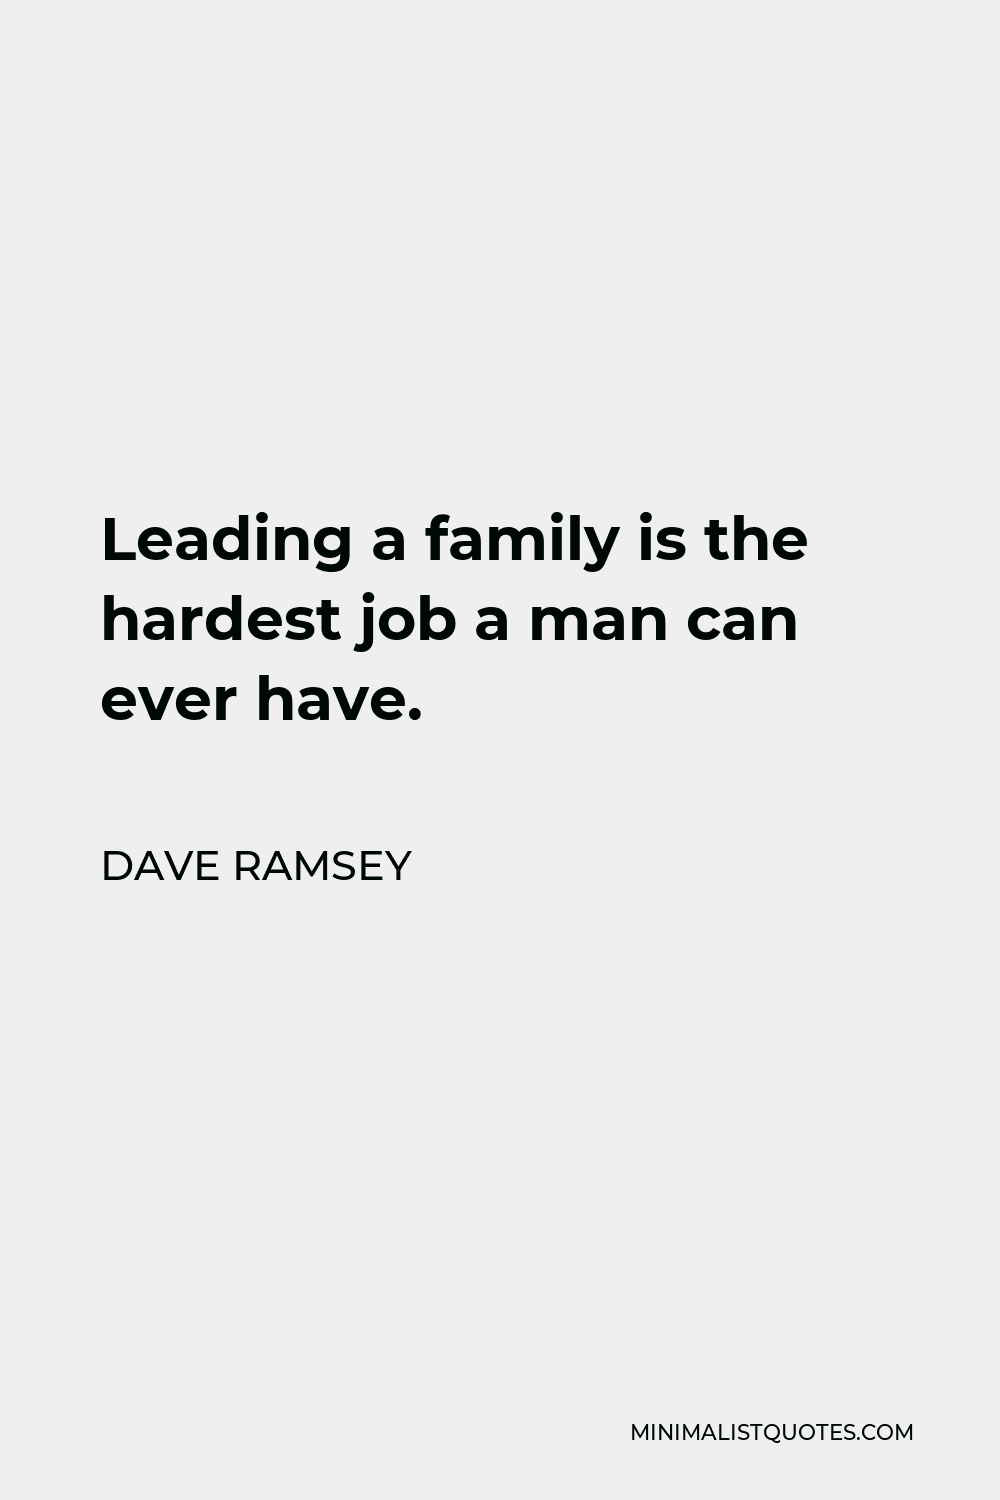 Dave Ramsey Quote - Leading a family is the hardest job a man can ever have.